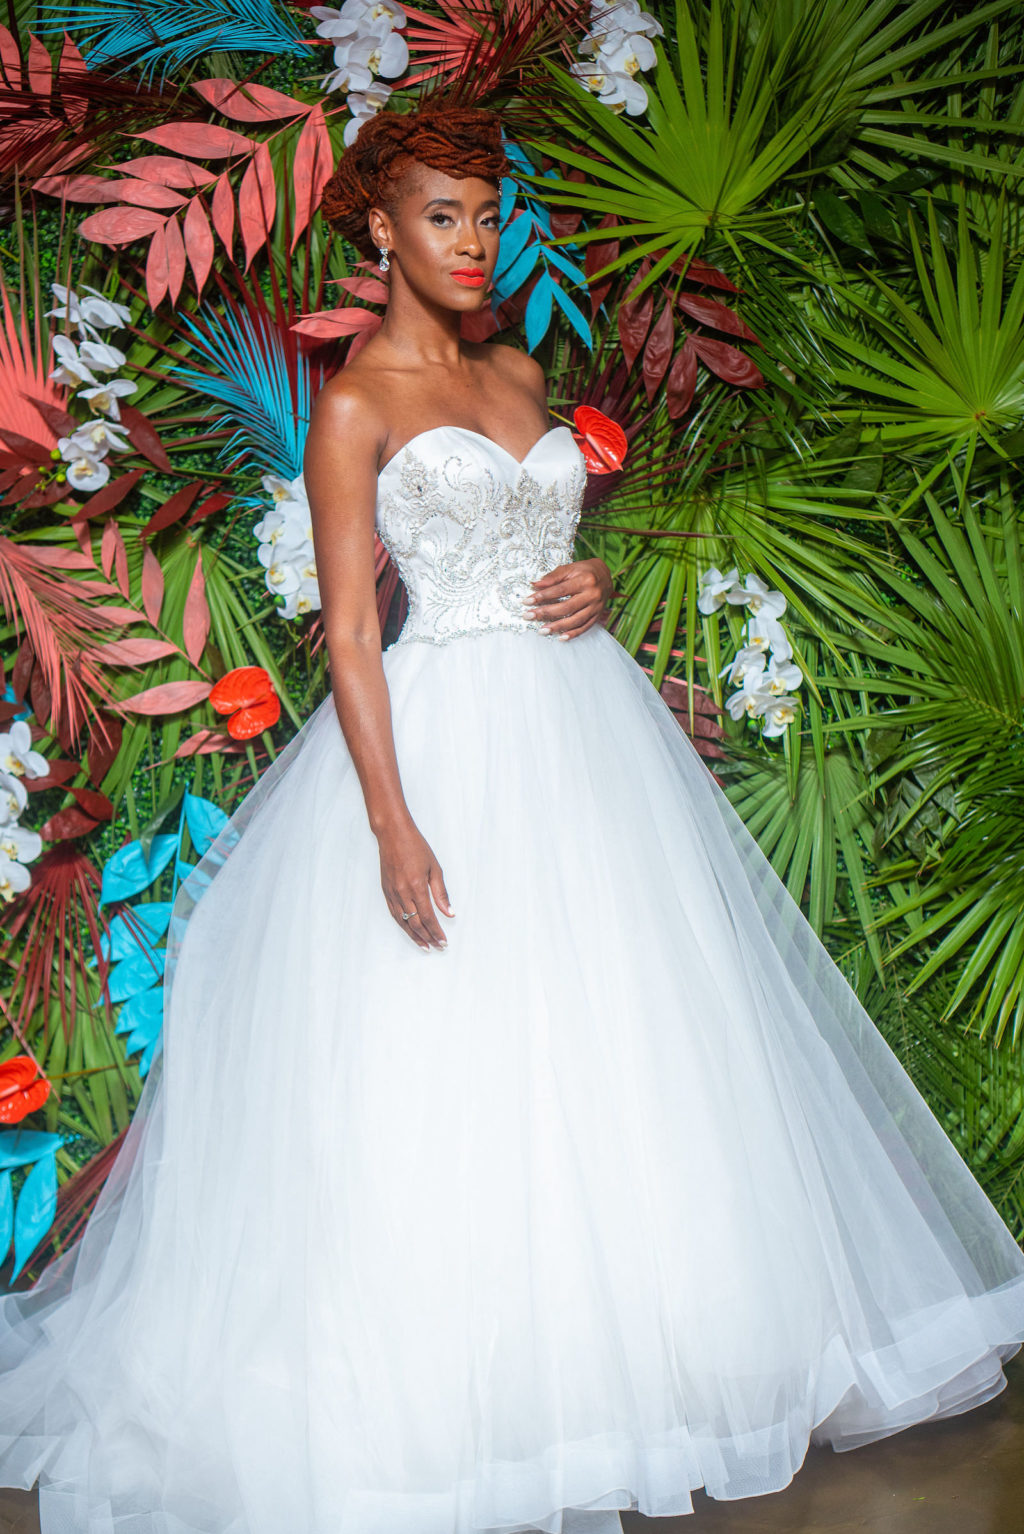 Dearly Beloved Fashion Show, Bride Wearing Ballgown Wedding Dress wtih Beaded Corset Detailing and Full Tull Skirt Designed by Royal Bridal, Modern Tropical Floral Wall with Green, Pink and Aqua Blue | Florida Wedding Venue 7th and Grove